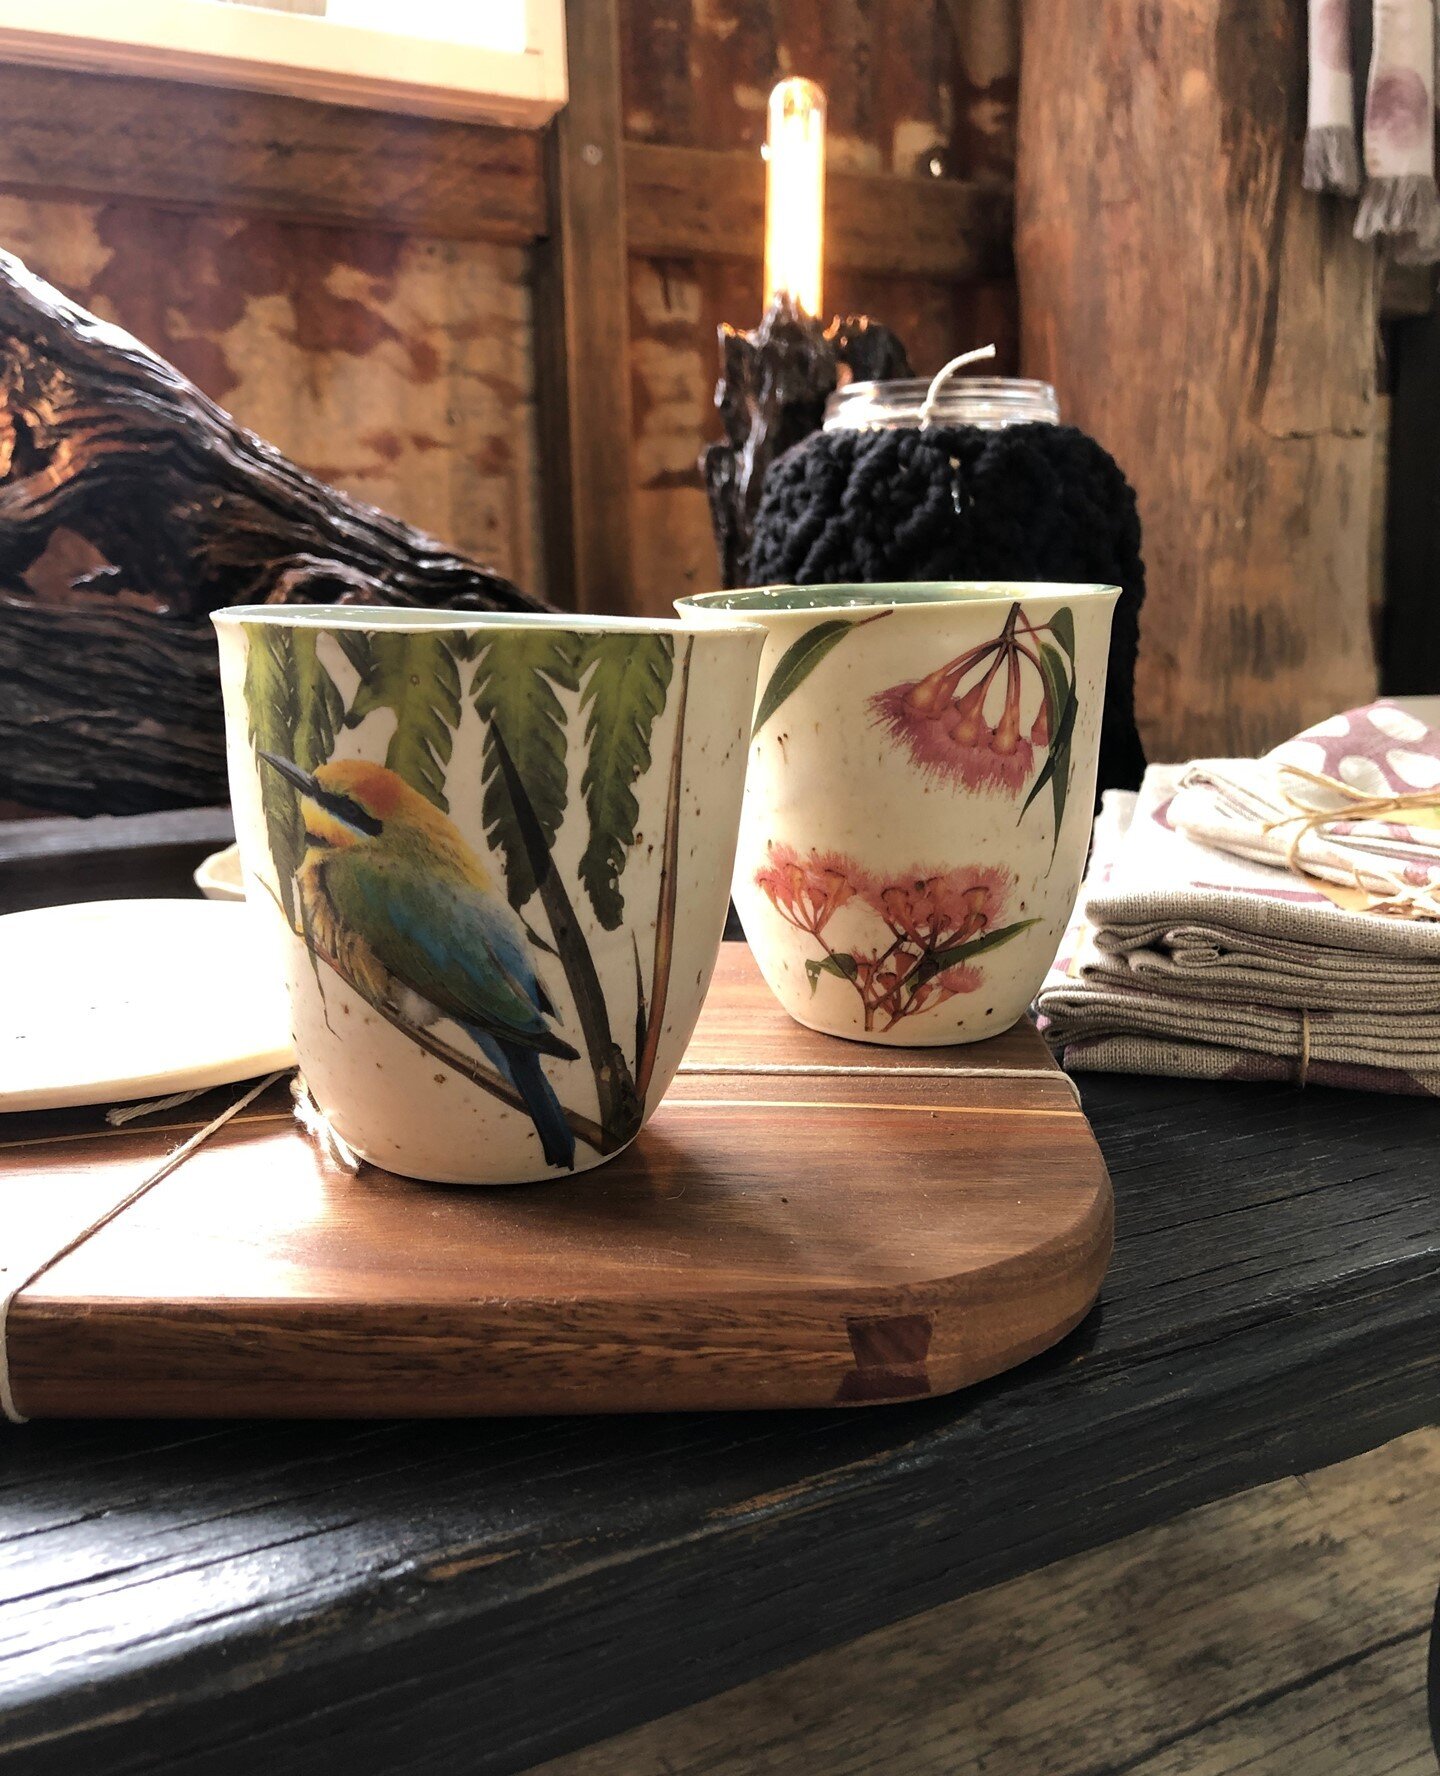 #kingfisher and #blossomgums 2 of our designs for cups. Don't they look great amongst the all these other pieces at @roadsidegallerywollombi?⁠
.⁠
.⁠
#coffecups #keepcups #ceramiccups #takeaway ⁠
#wollombi #localartists #collaboration